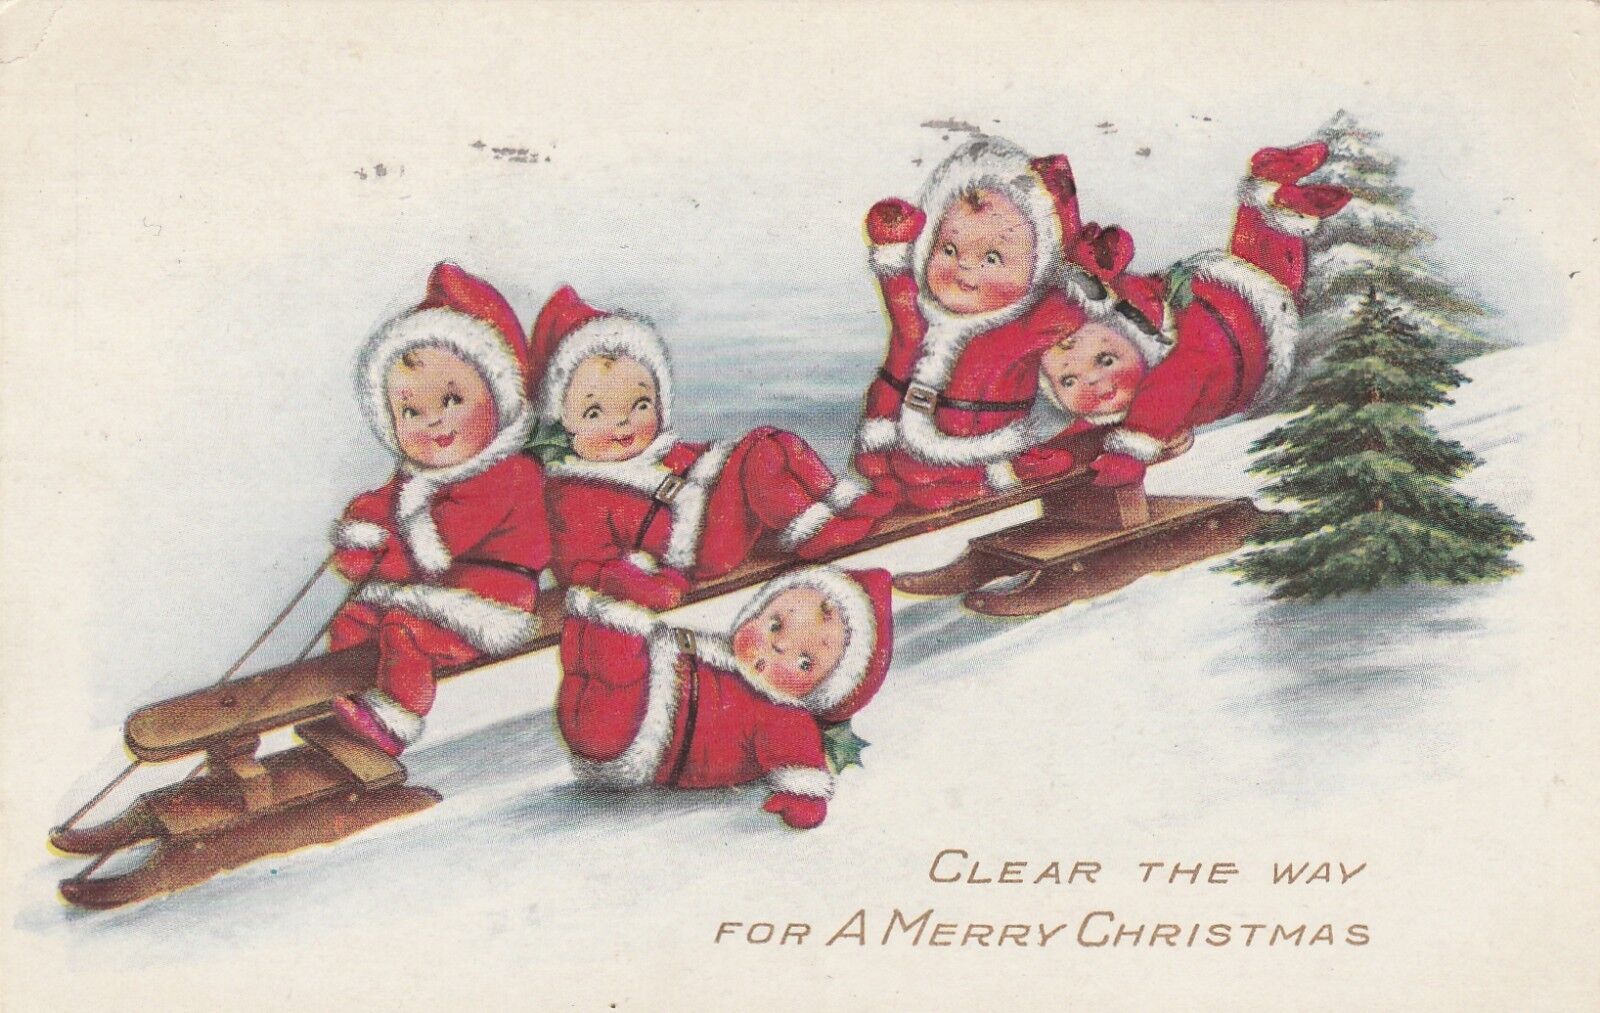 *KAPPY 042418-34 POSTCARD POSTED 1917 CHILDREN SANTA SUITS ON ANTIQUE SLED